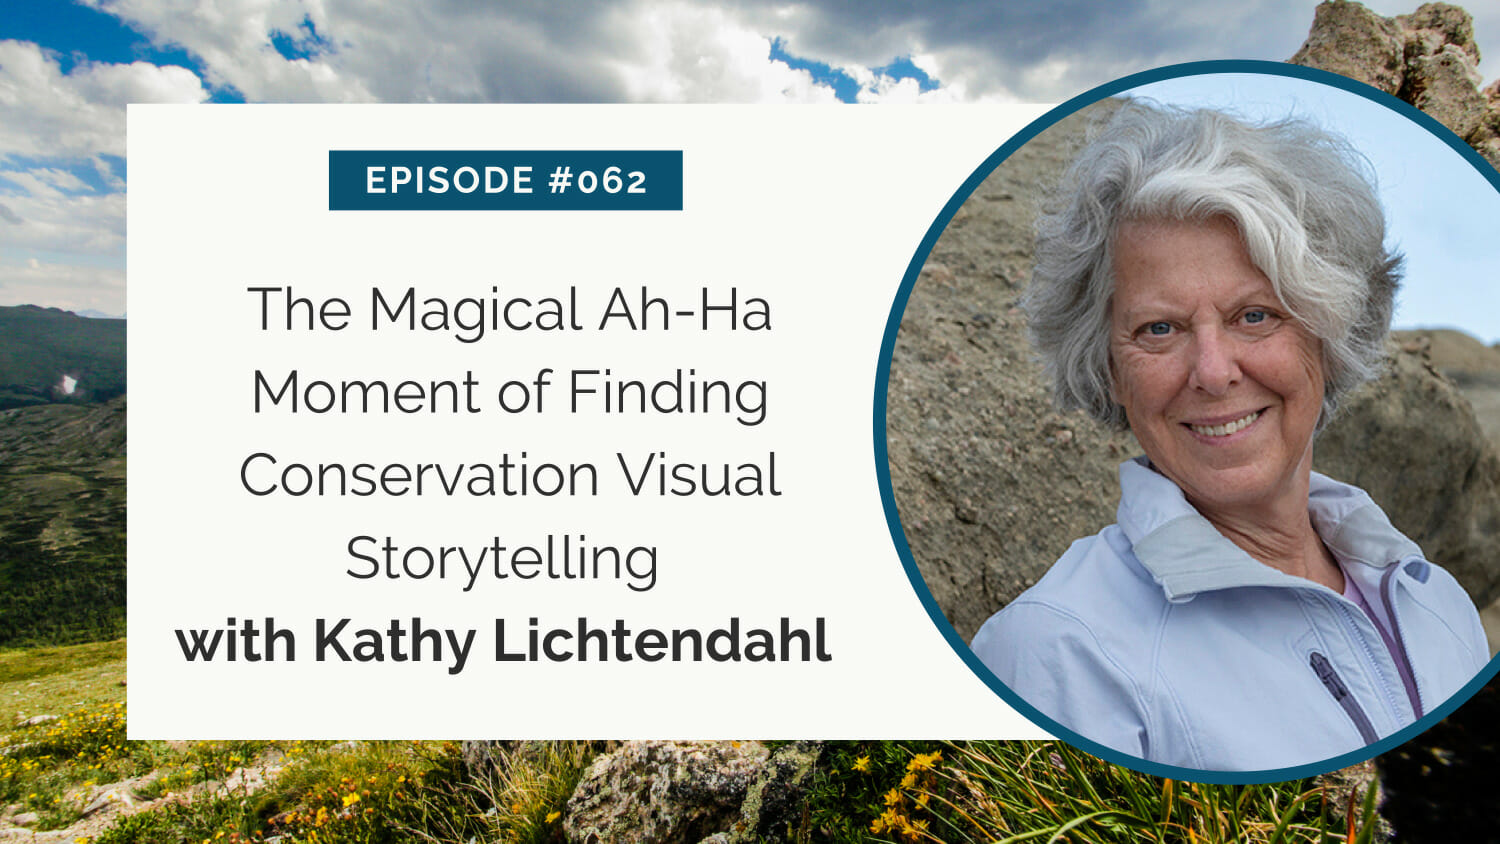 Podcast episode #062 featuring kathy lichtendahl discussing the discovery of visual storytelling in conservation.